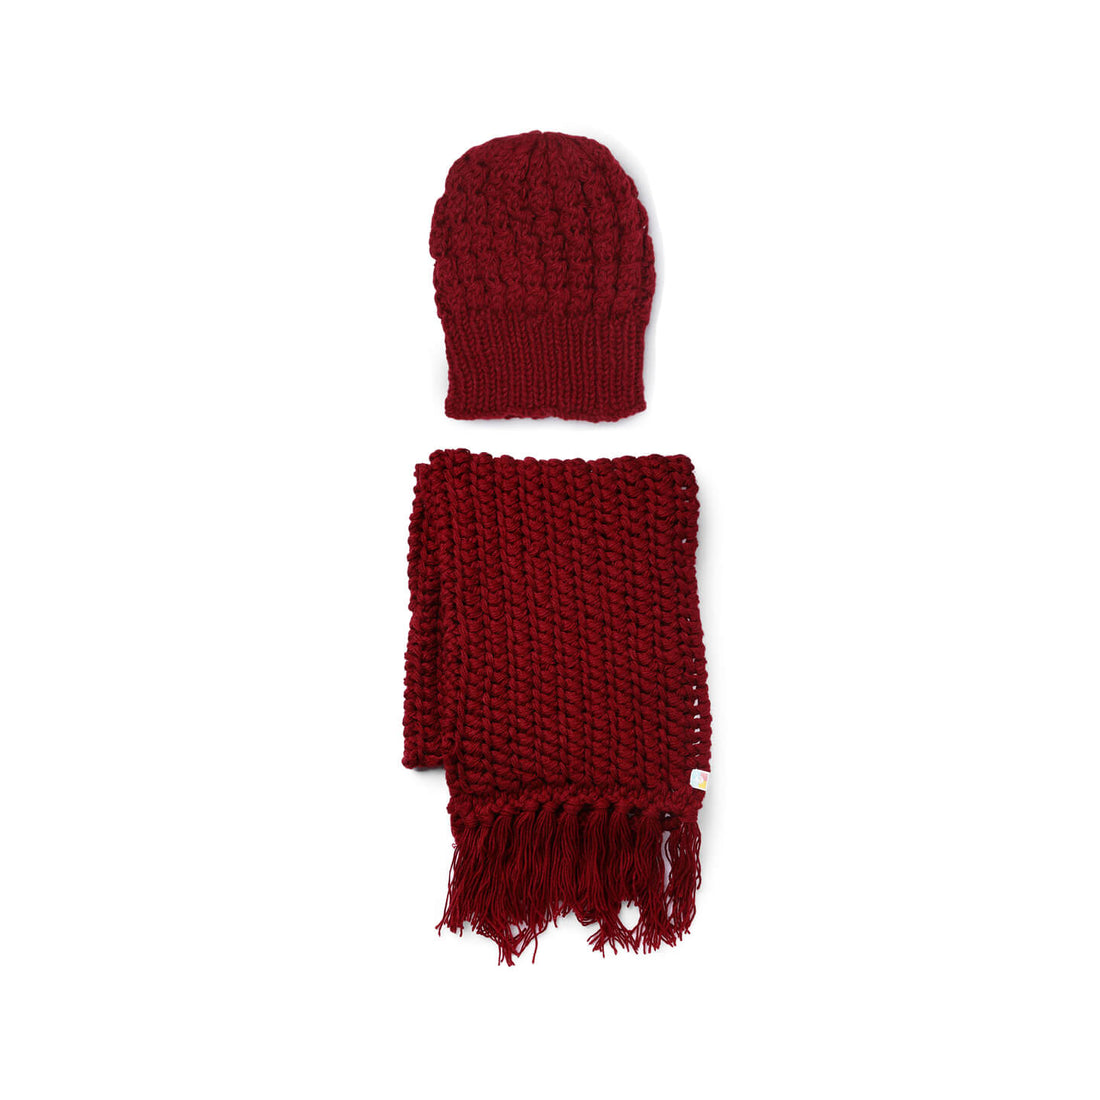 Beanie and Scarf Coordinating Set - 3183